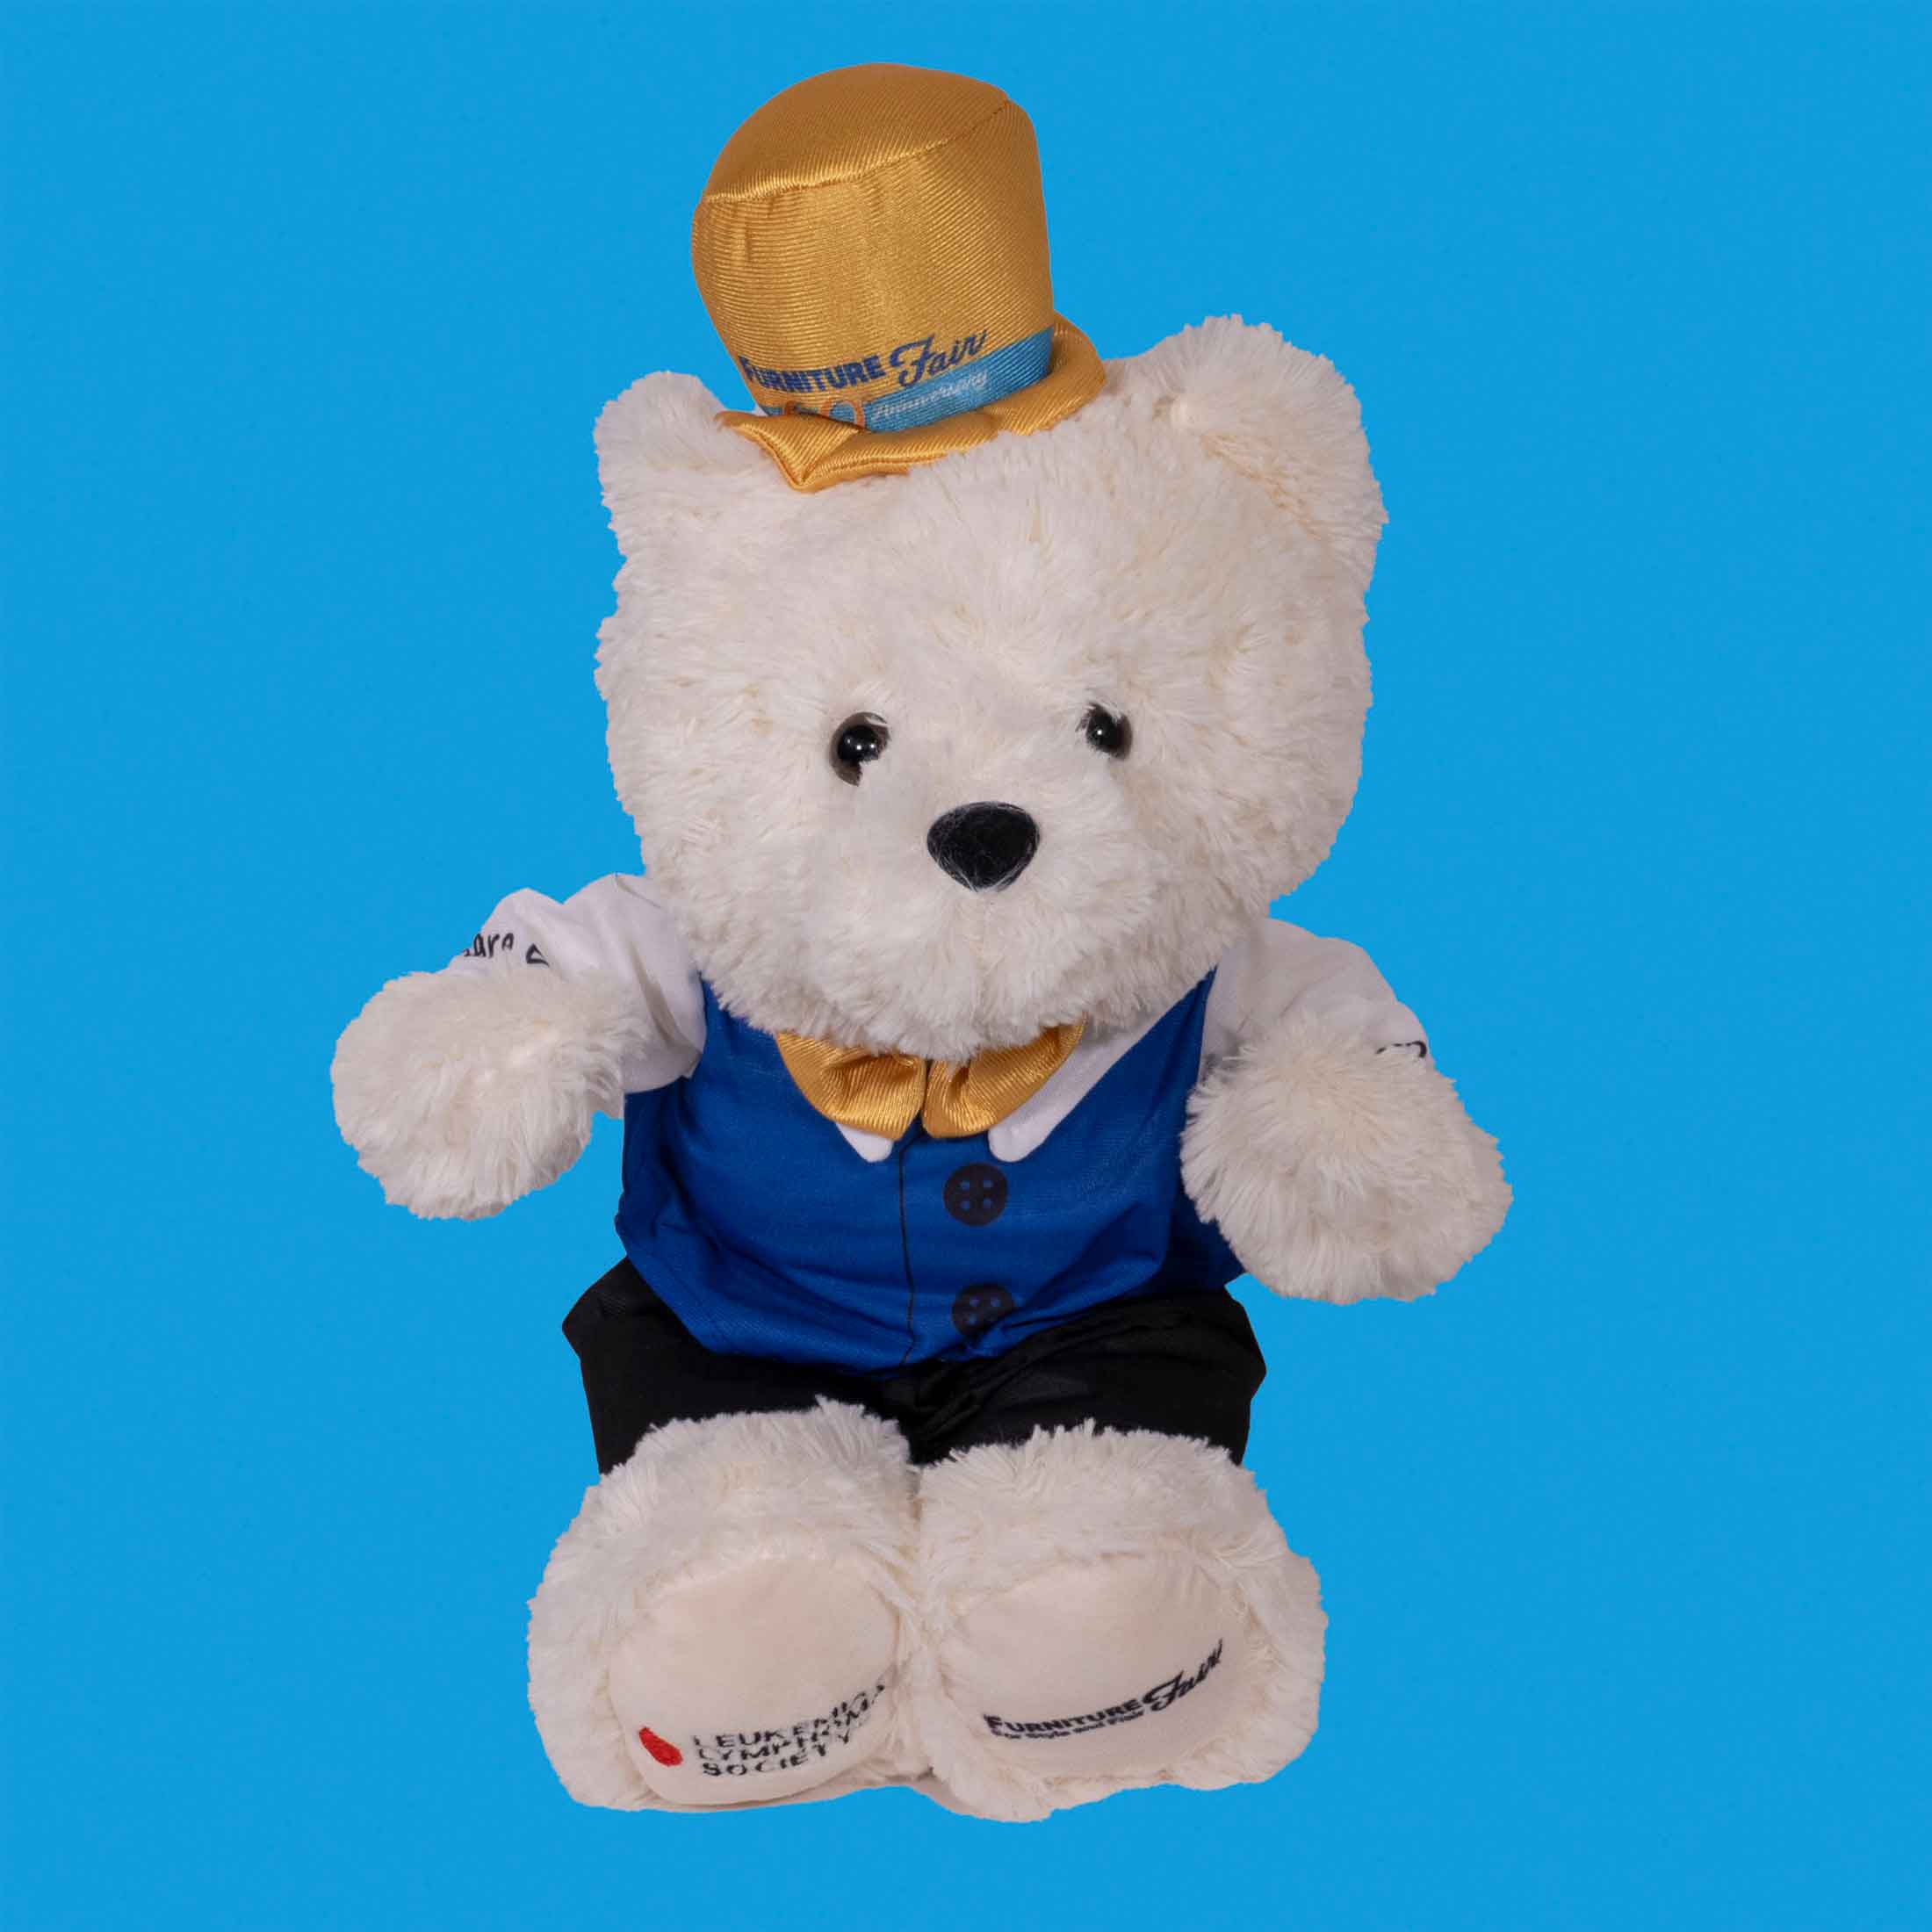 Get A Free Share Bear When You Buy At Furniture Fair